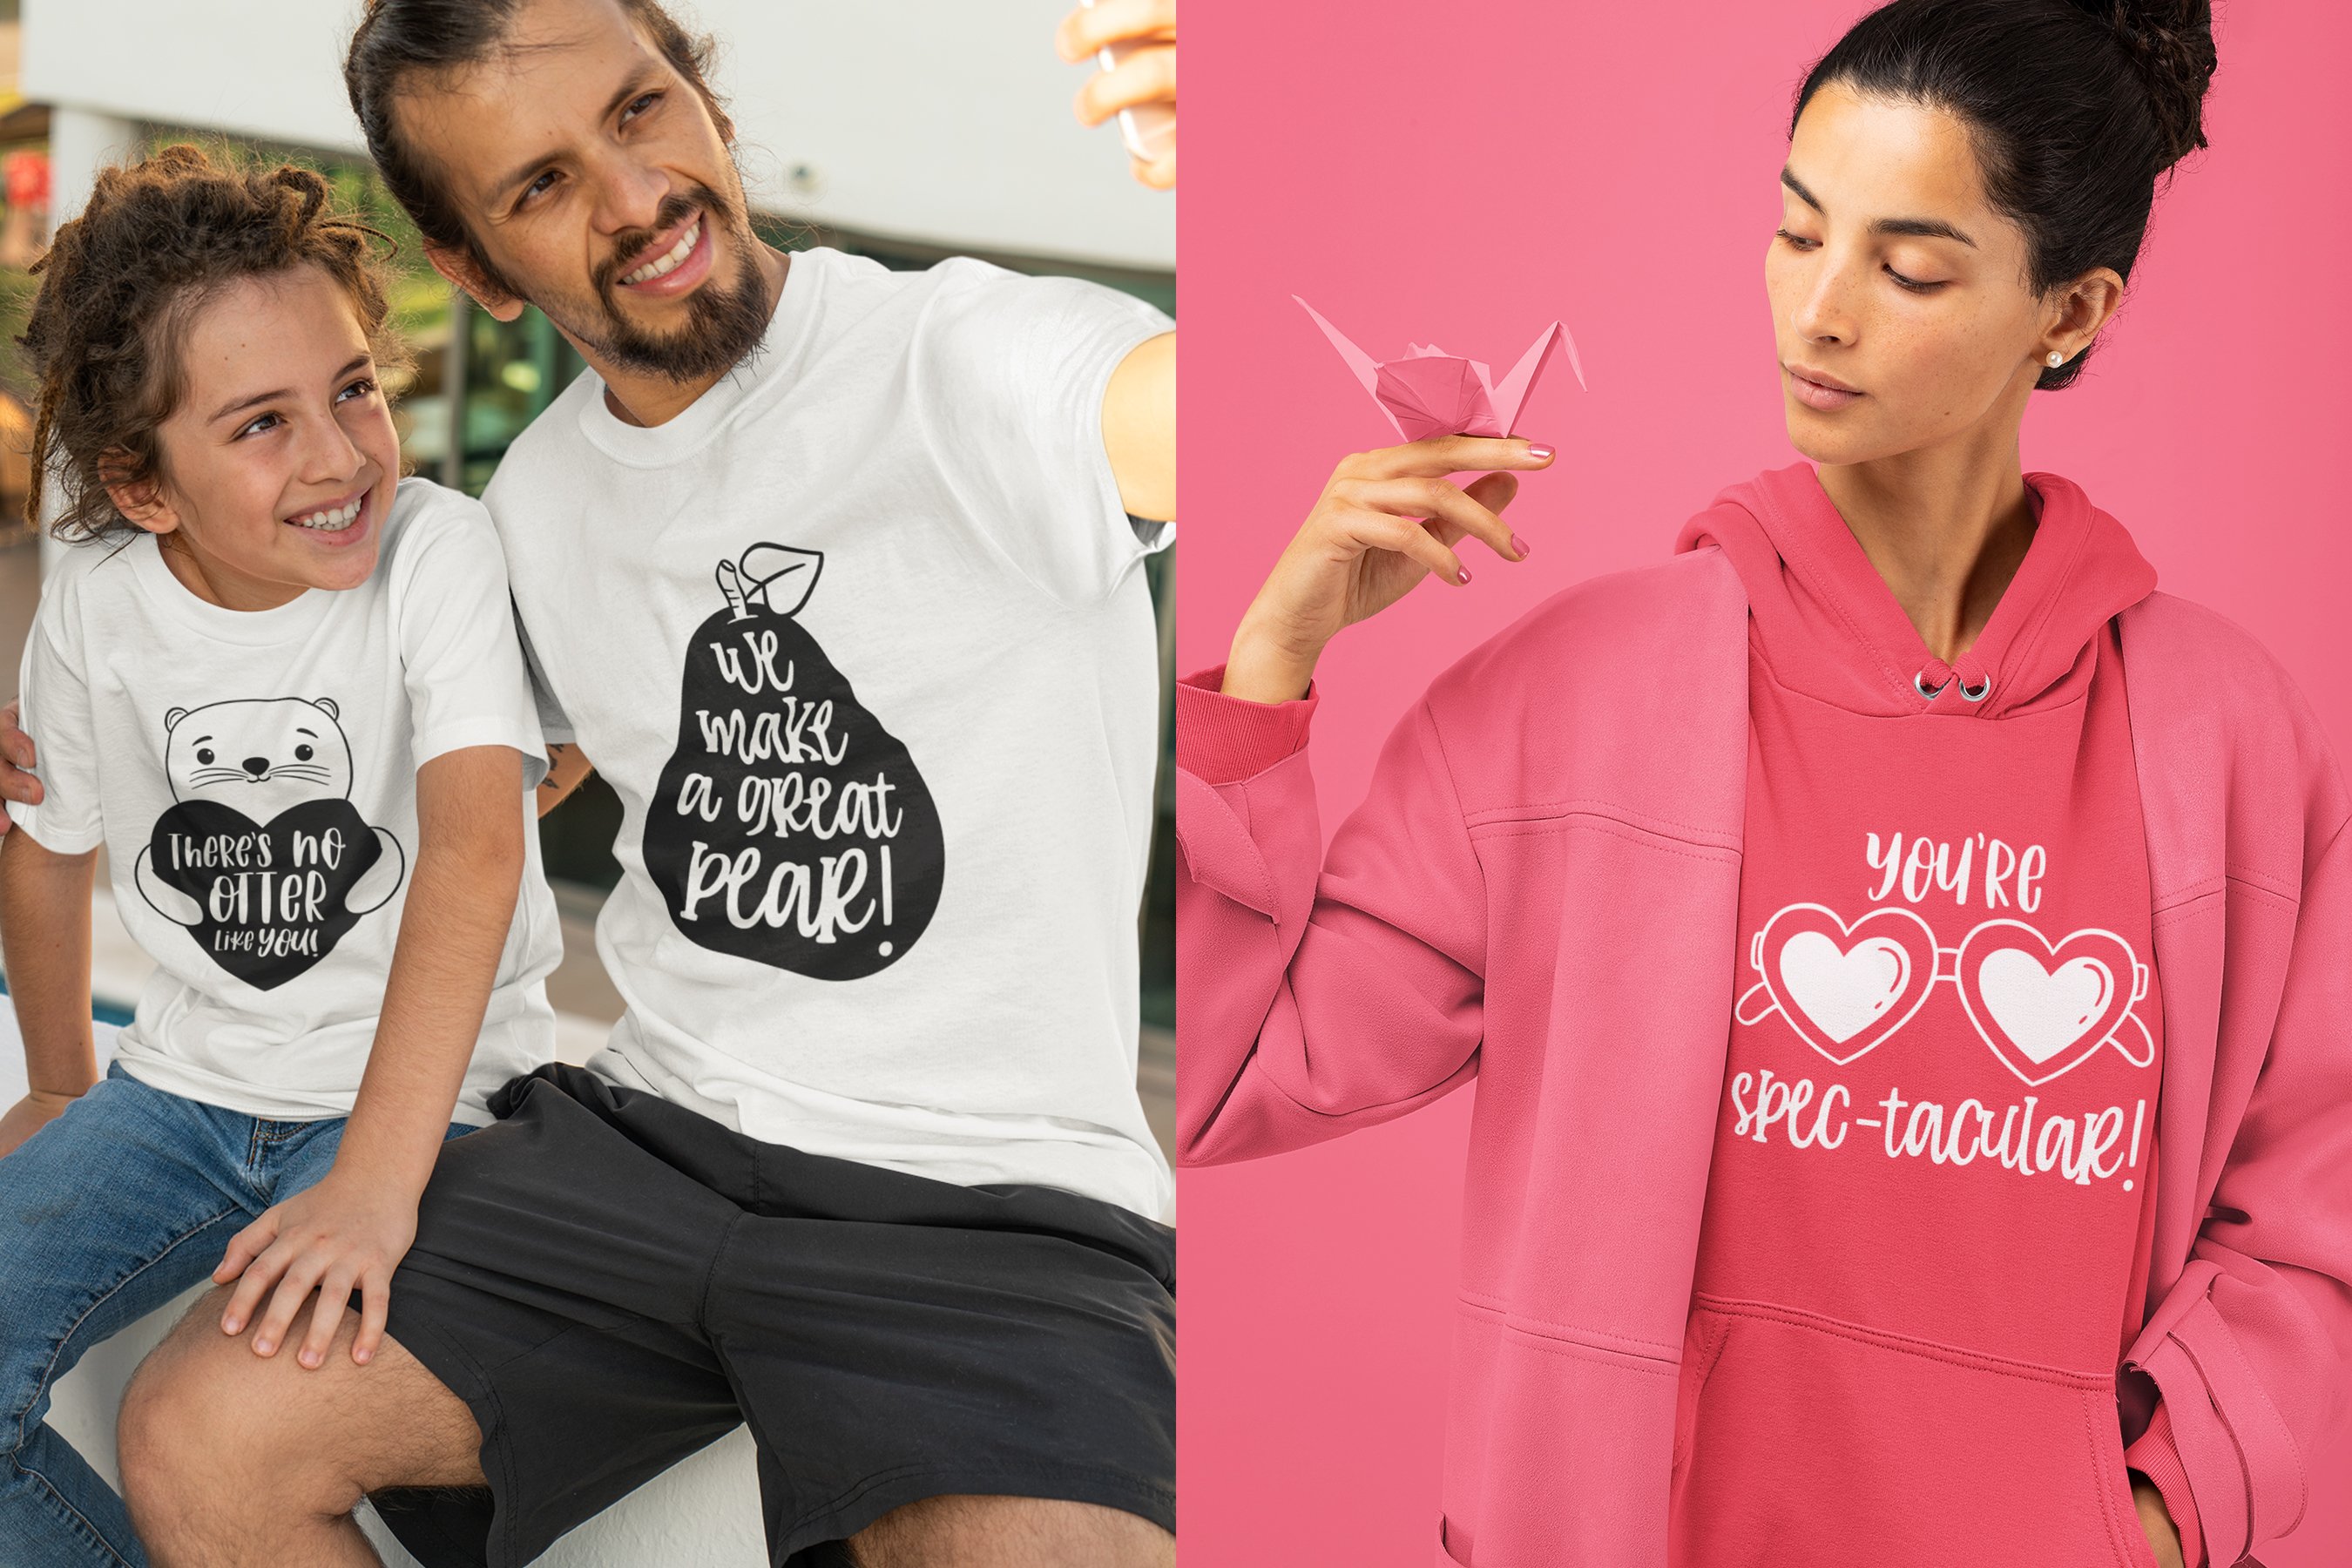 Clothes with the creative love graphic.